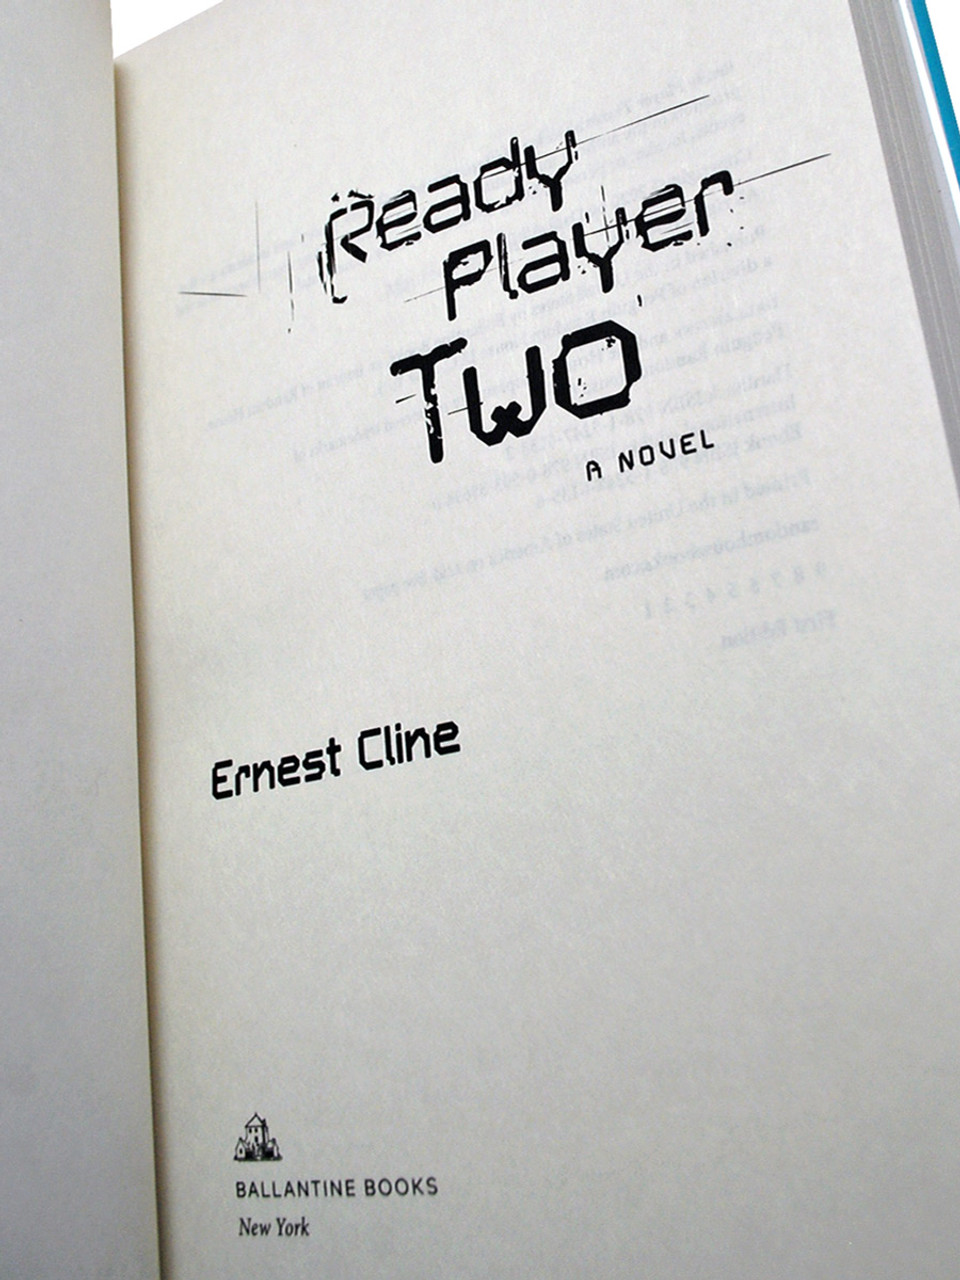 Ernest Cline "Ready Player One" + "Ready Player Two" Signed First Edition, First Printing, Slipcased 2-Vol. Box Set w/COA [Very Fine]